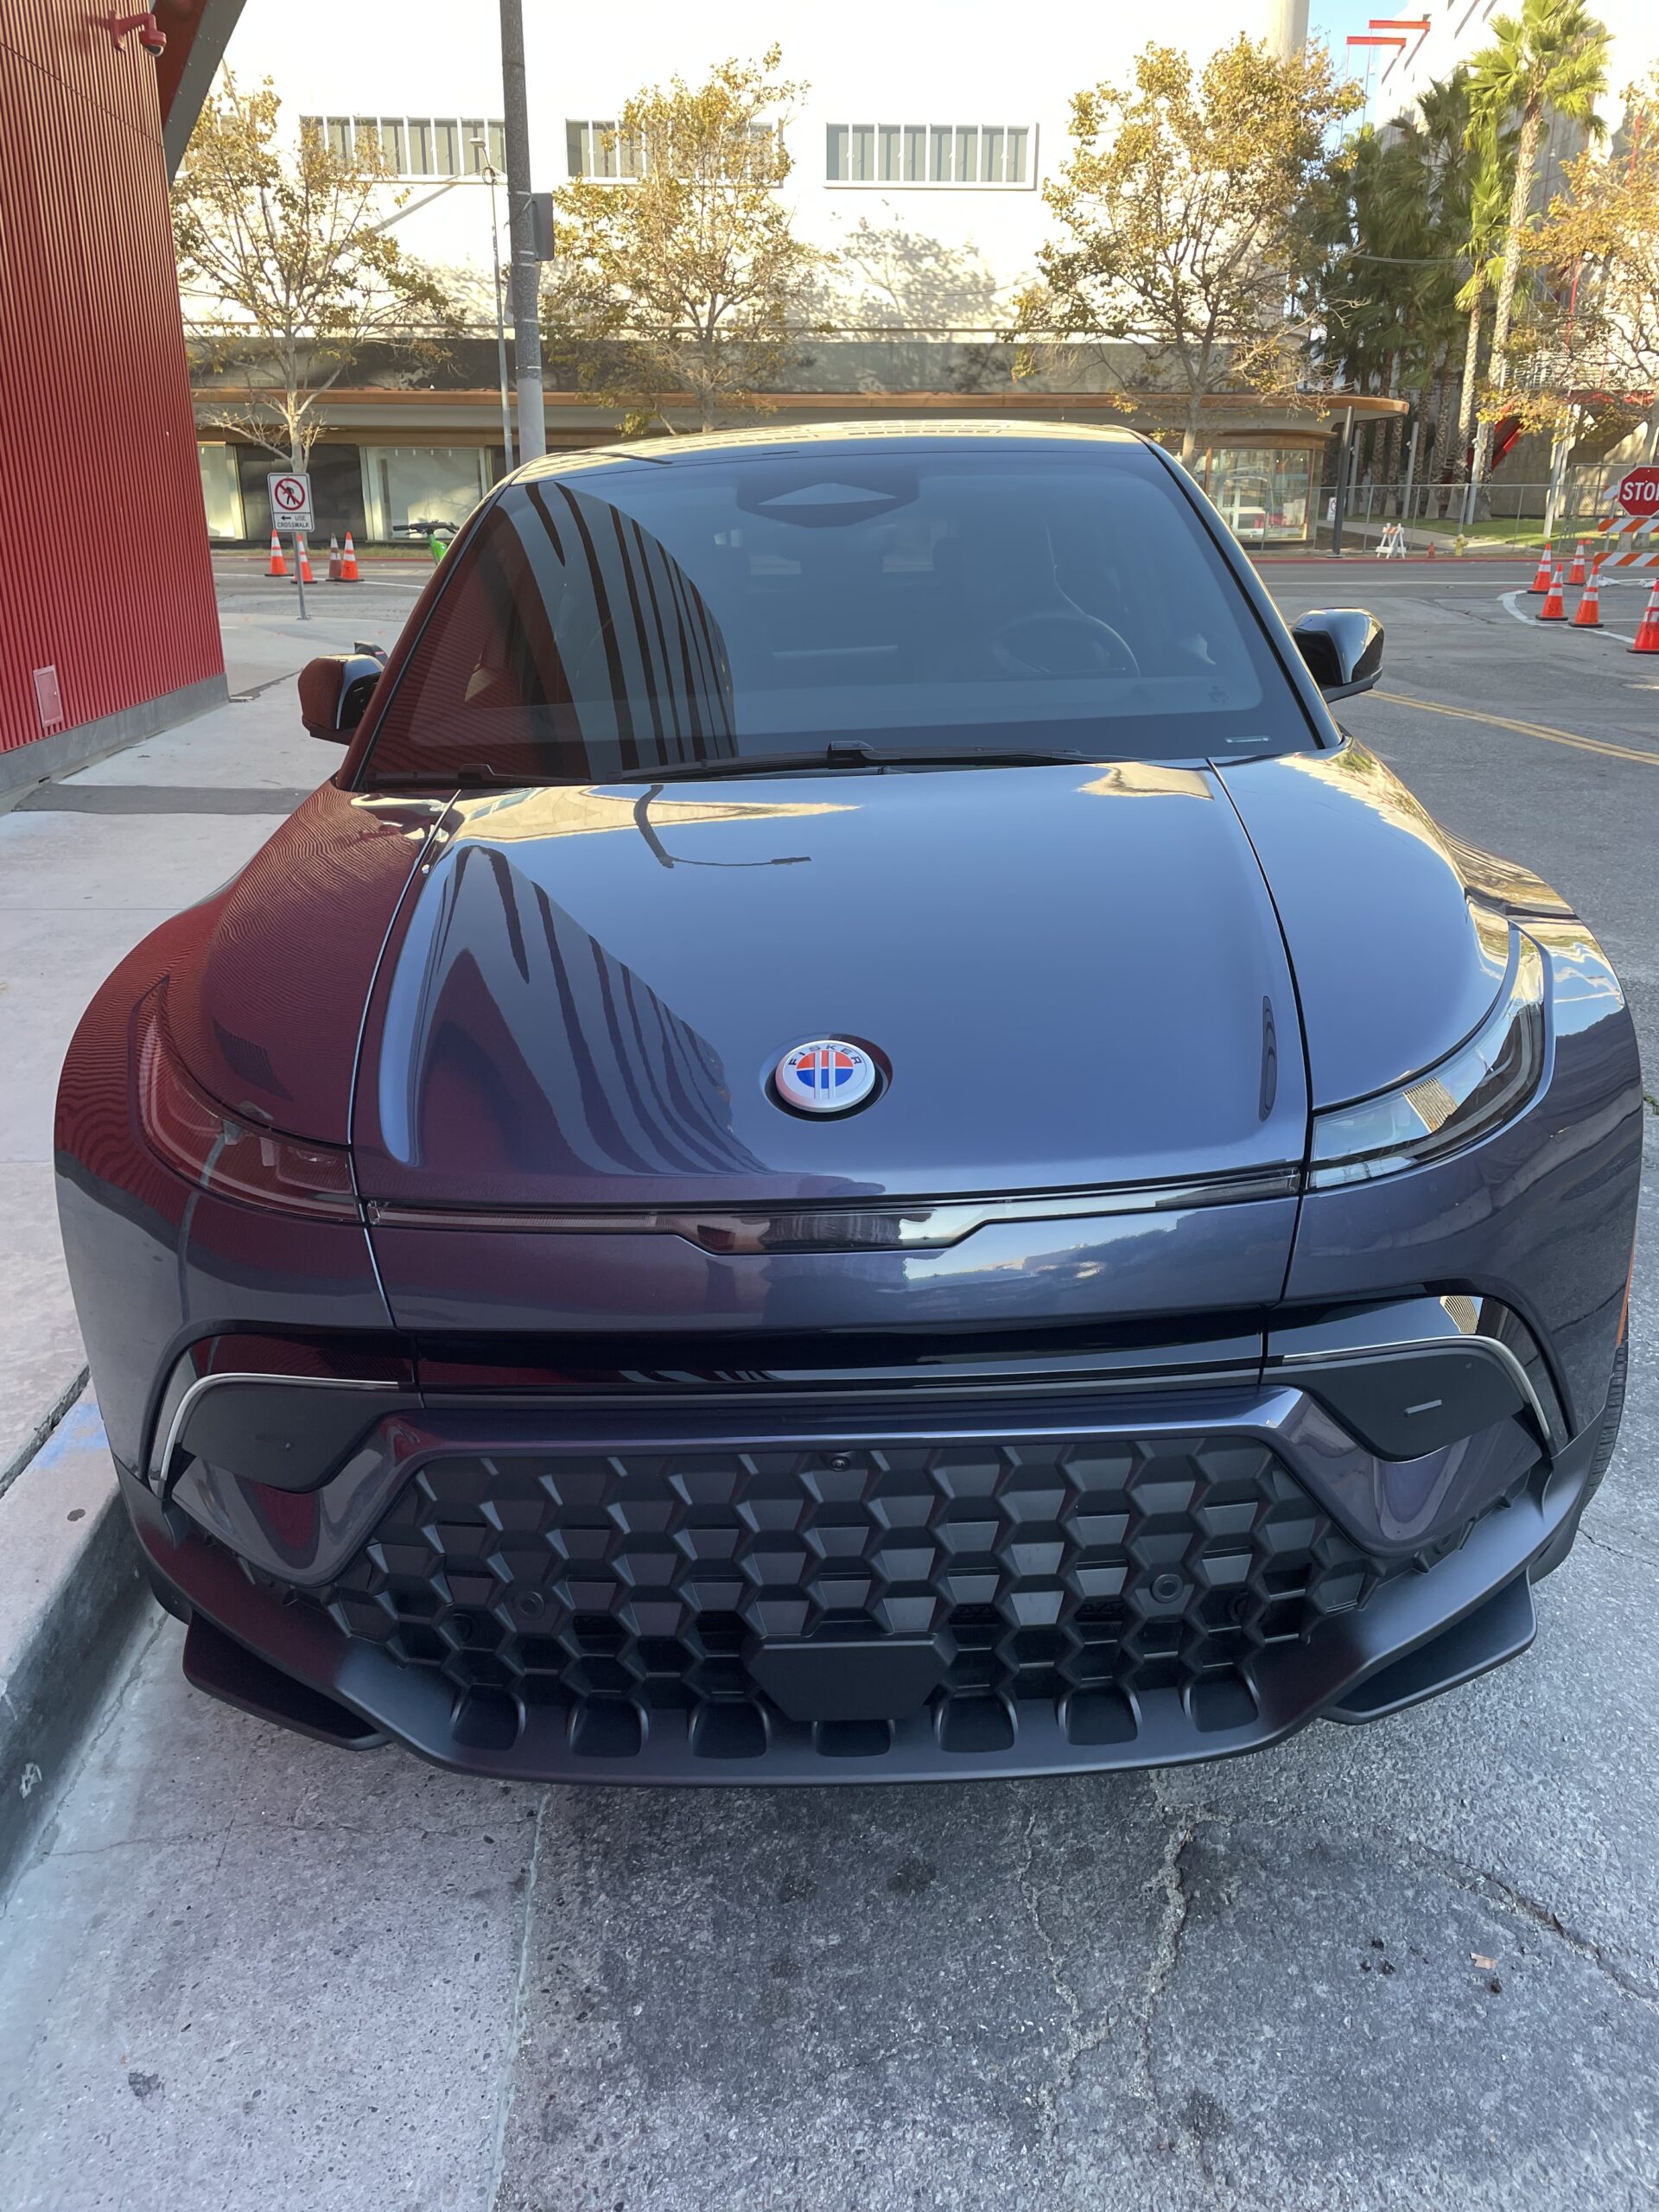 Fisker Ocean 1st Drive: Potential Contender With The Right Over-The-Air  Updates - CleanTechnica